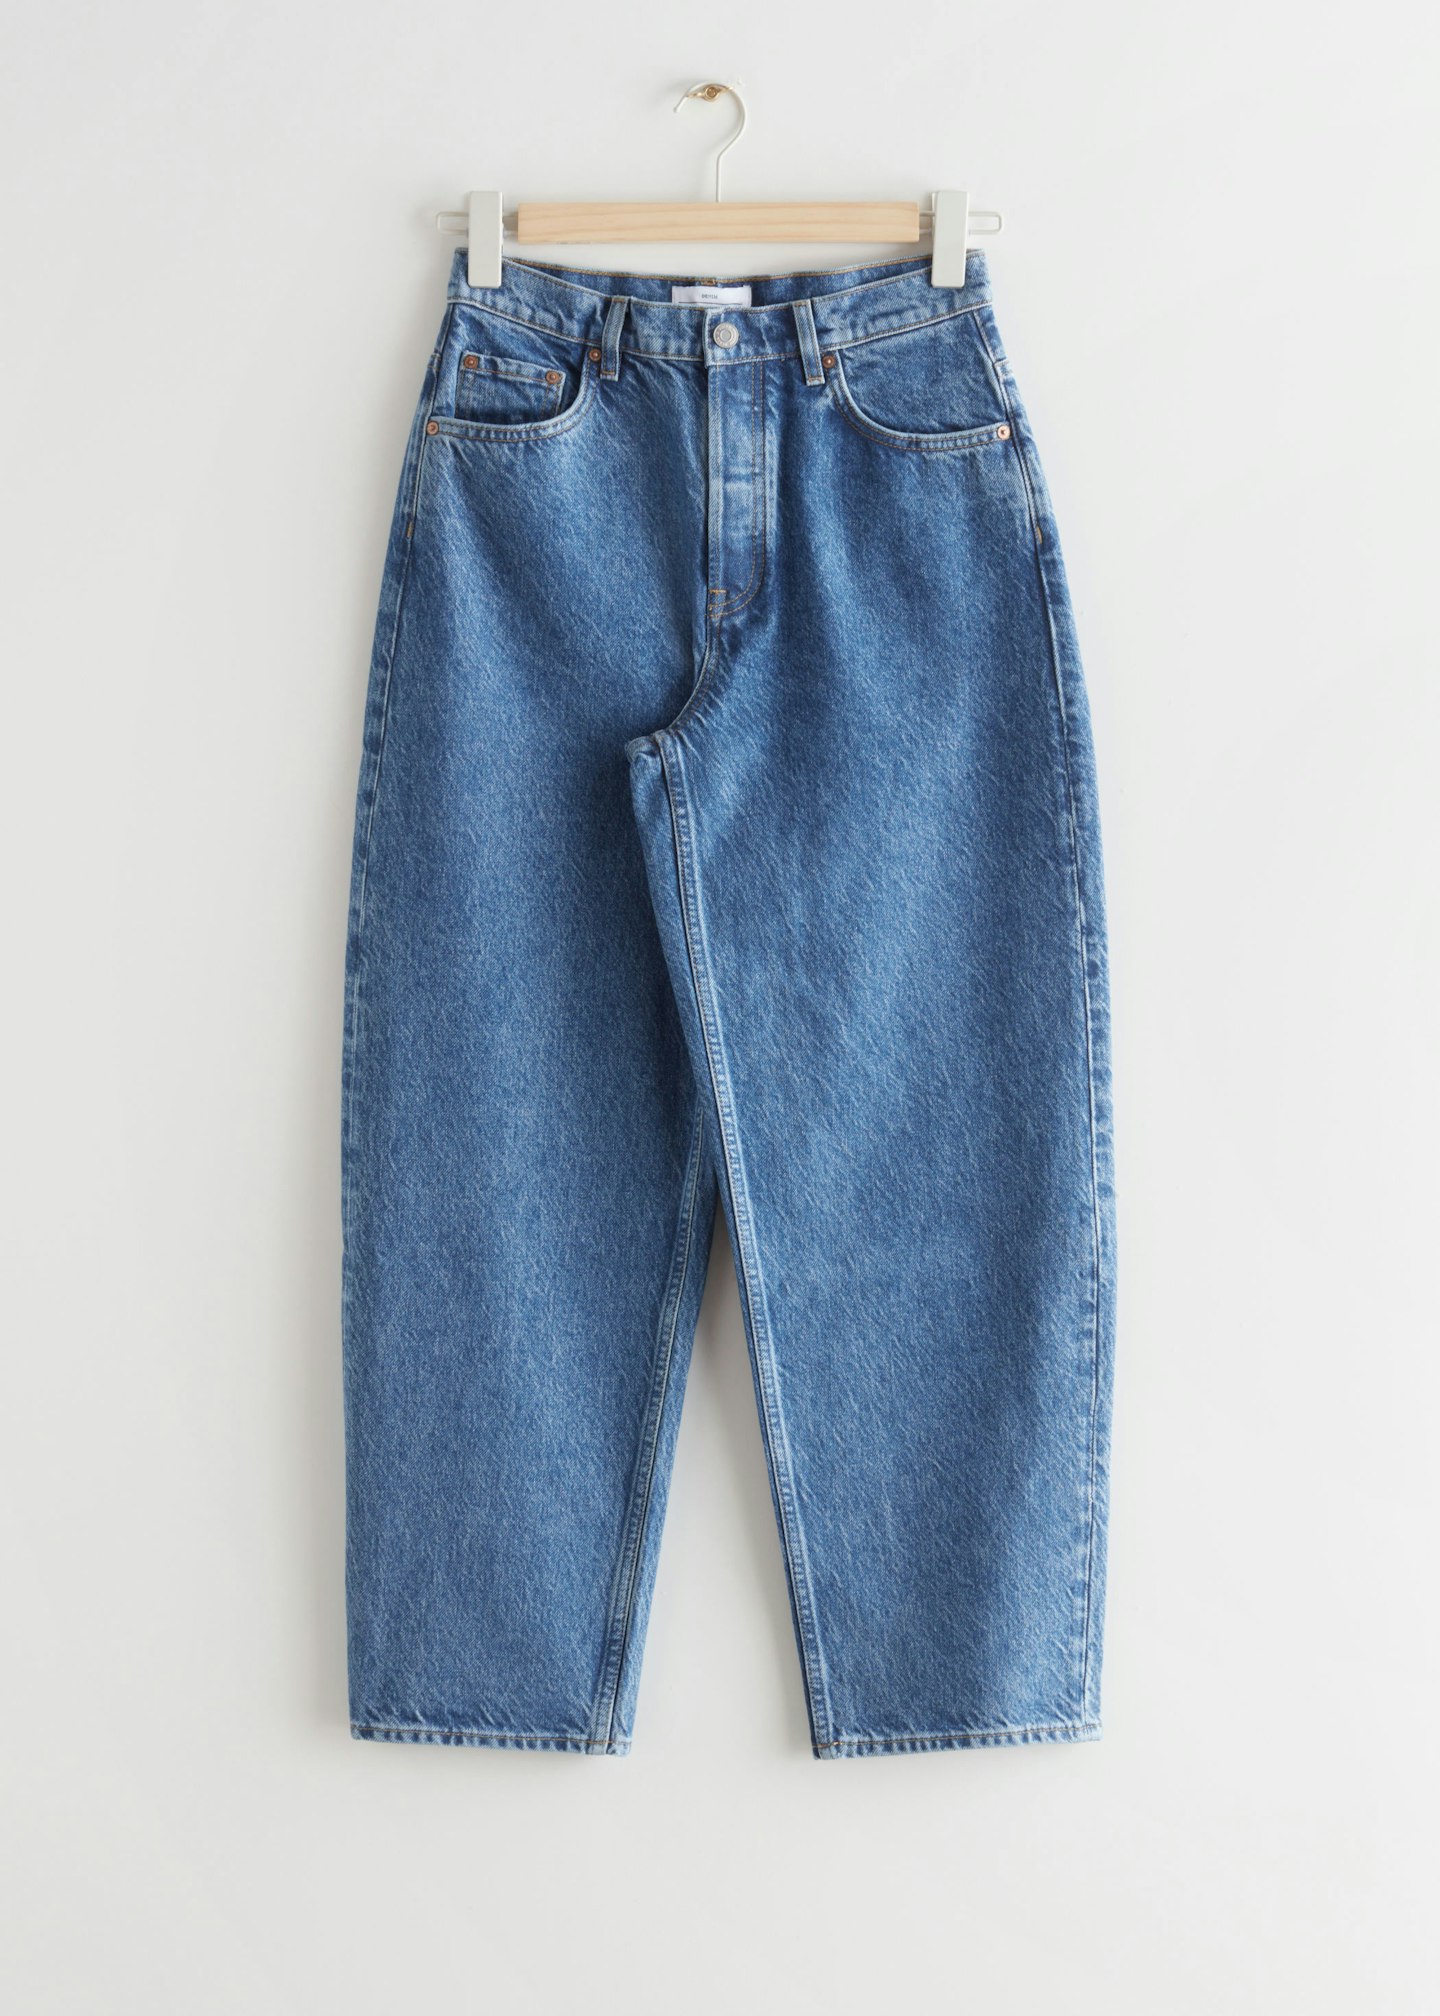 & Other Stories, Major Cut Cropped Jeans, £65